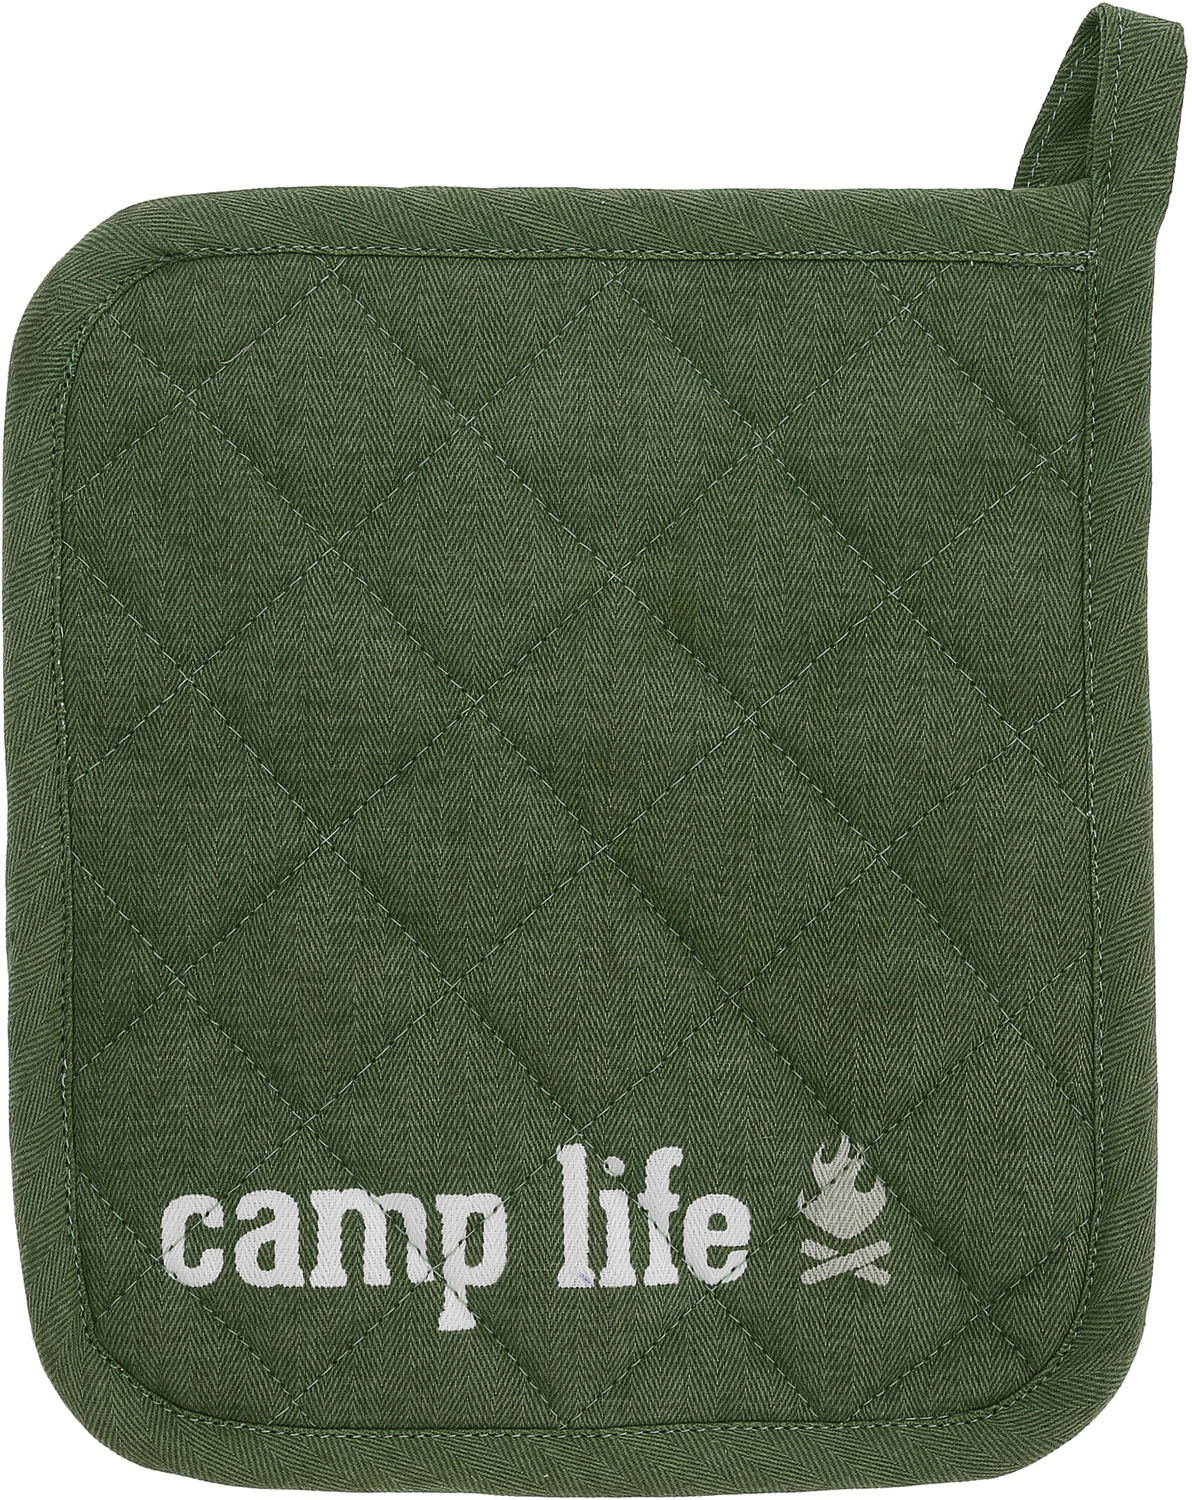 Camp Life by We People - Camp Life - 8 " x 9" Pot Holder